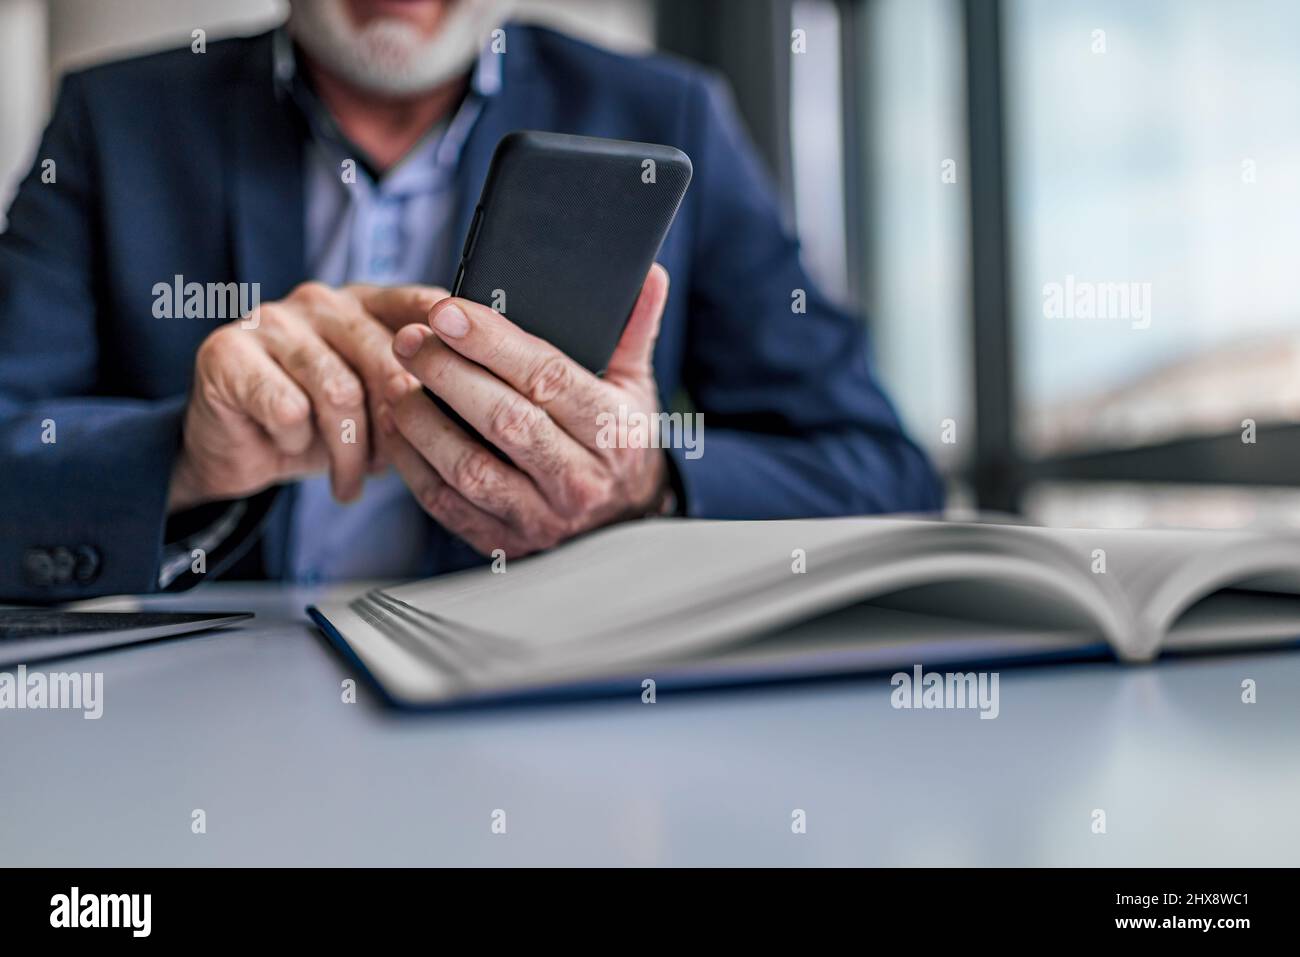 Faceless senior man holding smartphone checking messages and emails while sitting at modern bright office. Focus on hand and phone. Stock Photo